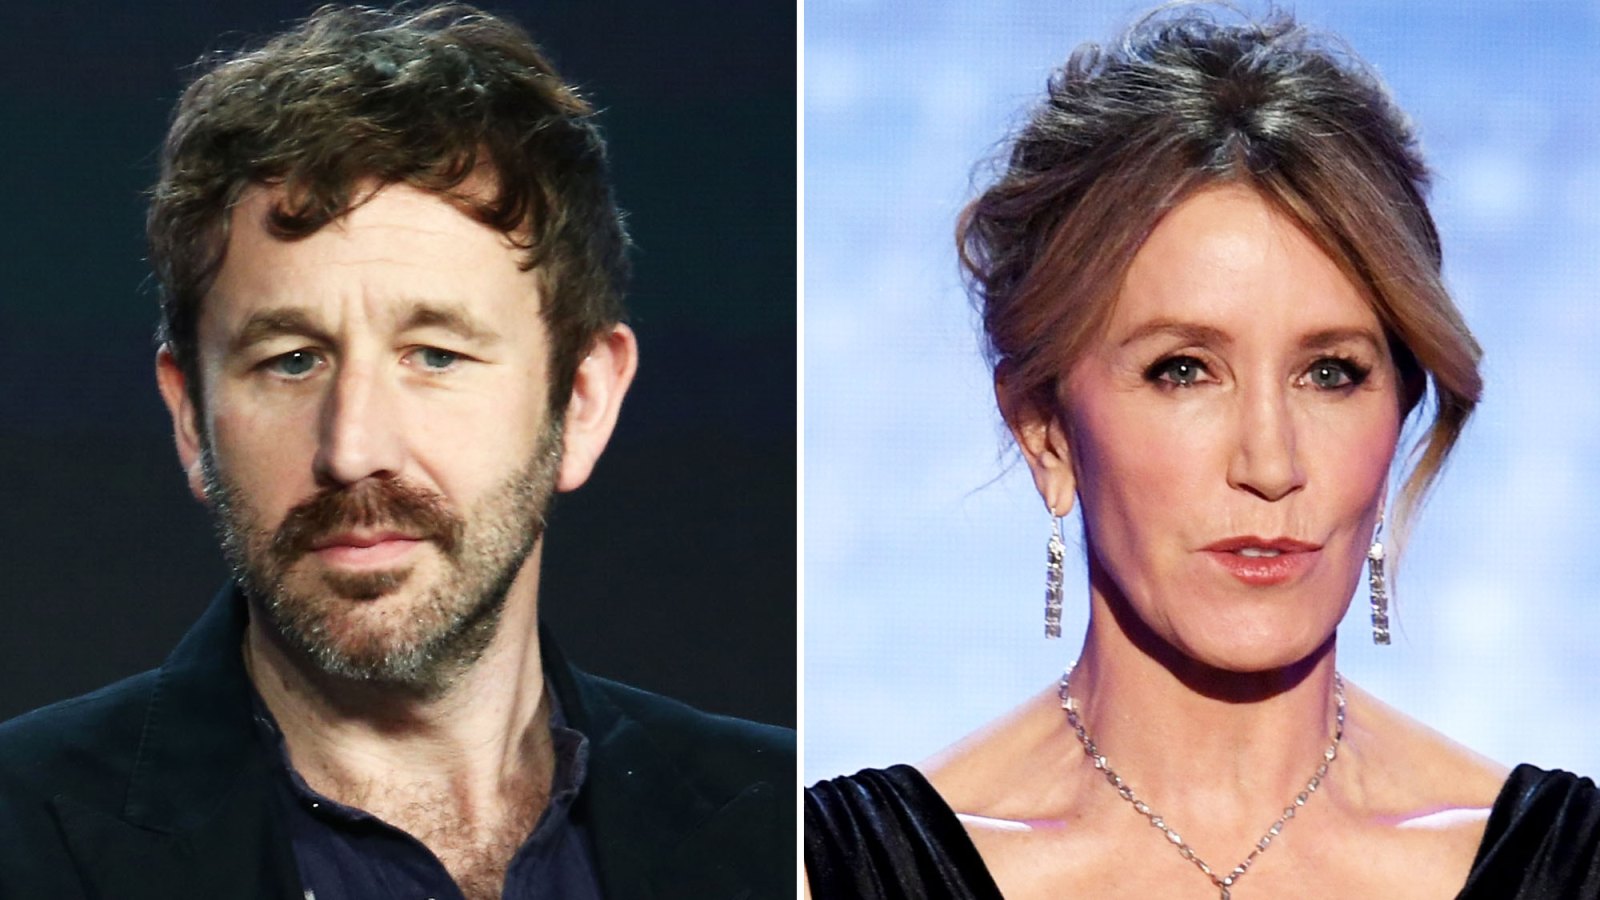 Chris O’Dowd Calls Costar Felicity Huffman’s College Scandal a ‘Very Trying Time’ for Her Family